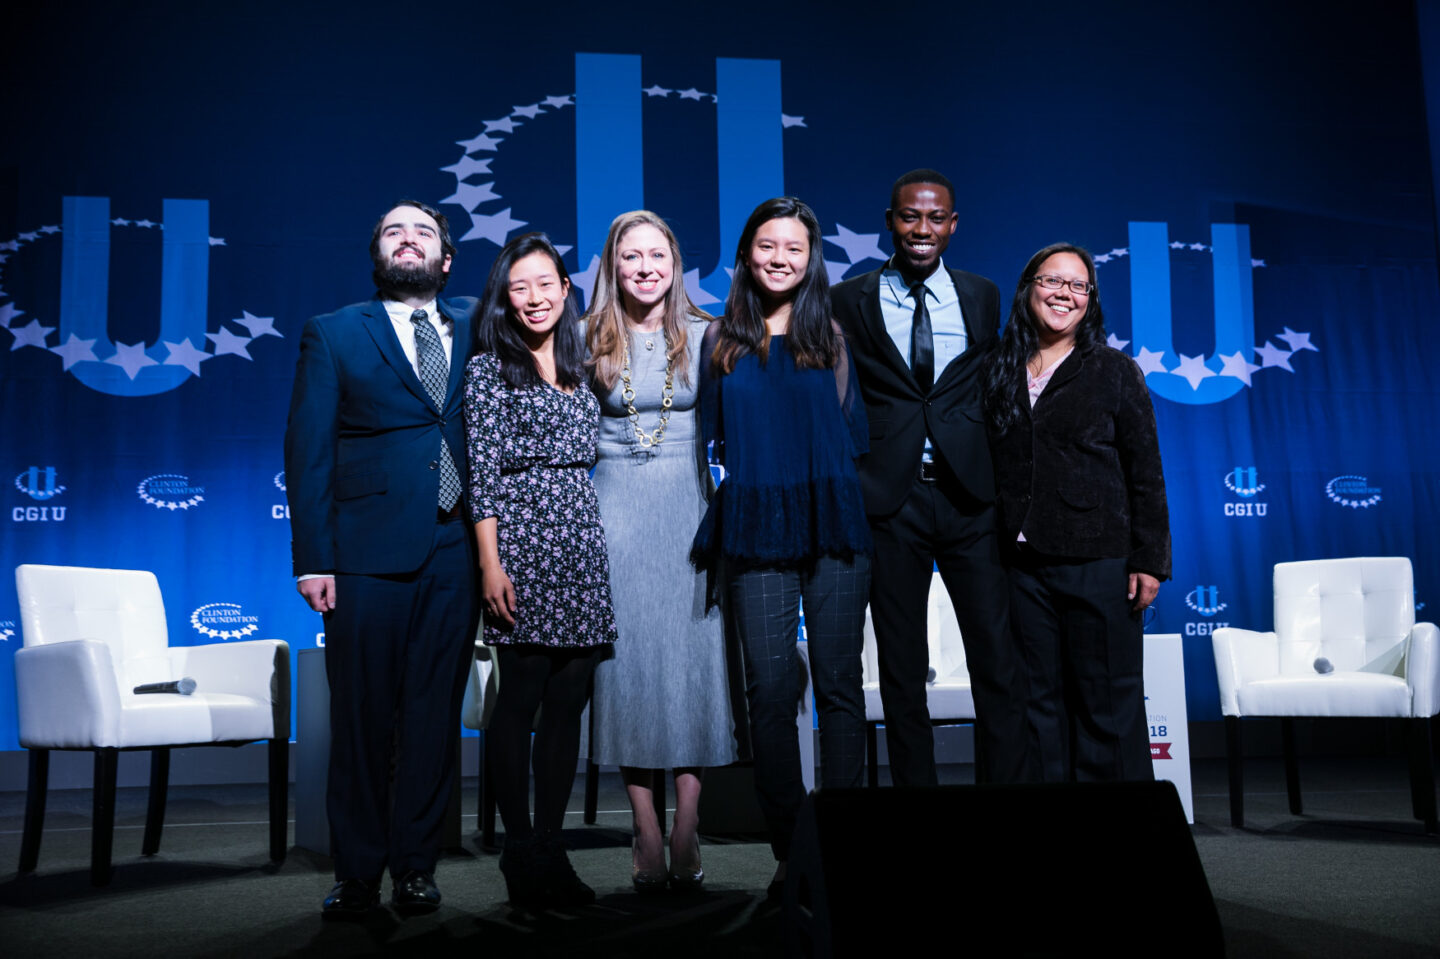 Chelsea Clinton takes a photo with student commitment-makers